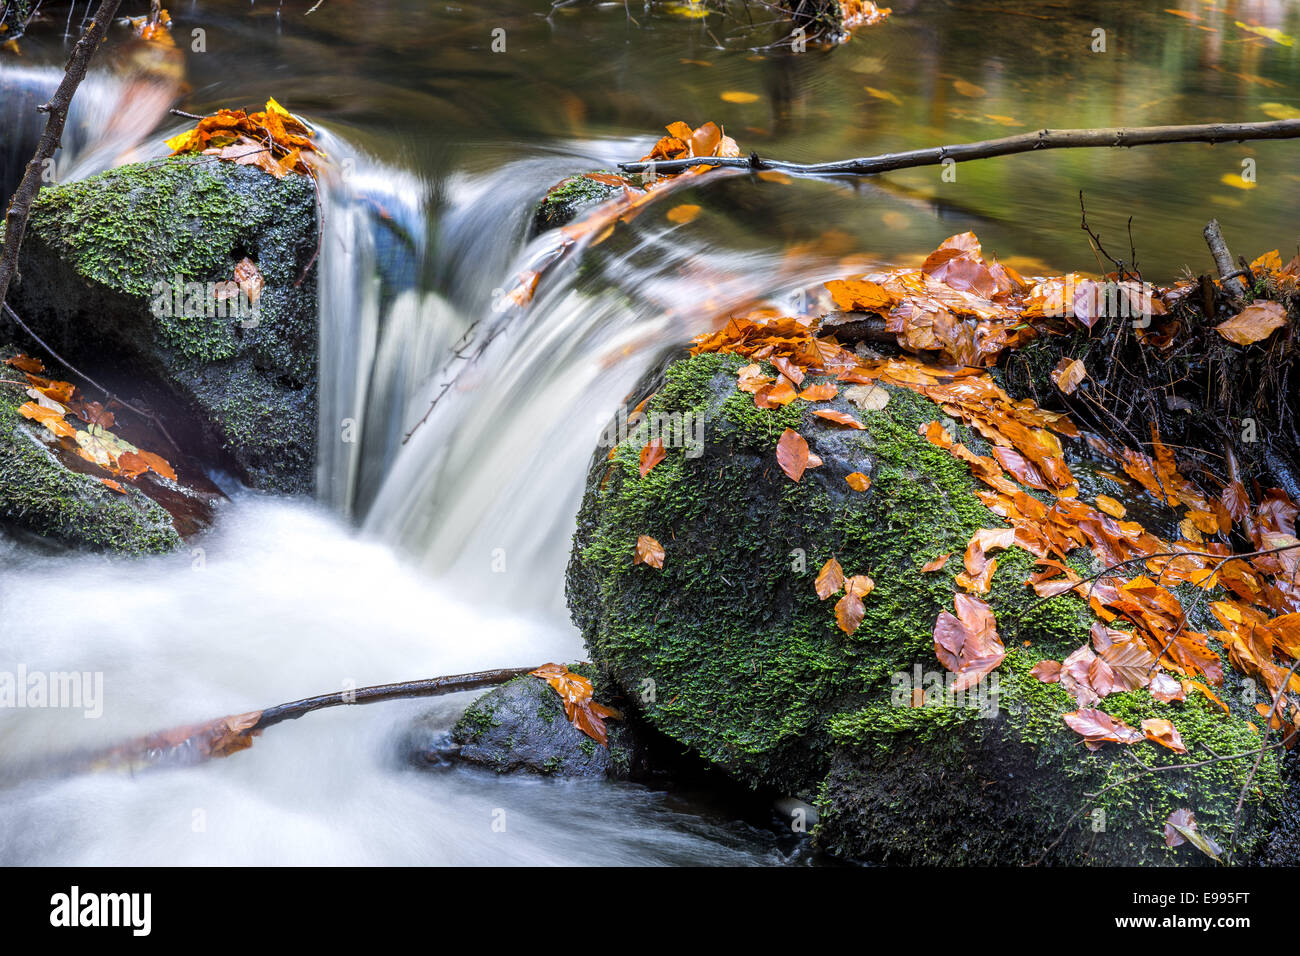 Current water flowing quickly between boulders covered with moss and fallen leaves Stock Photo